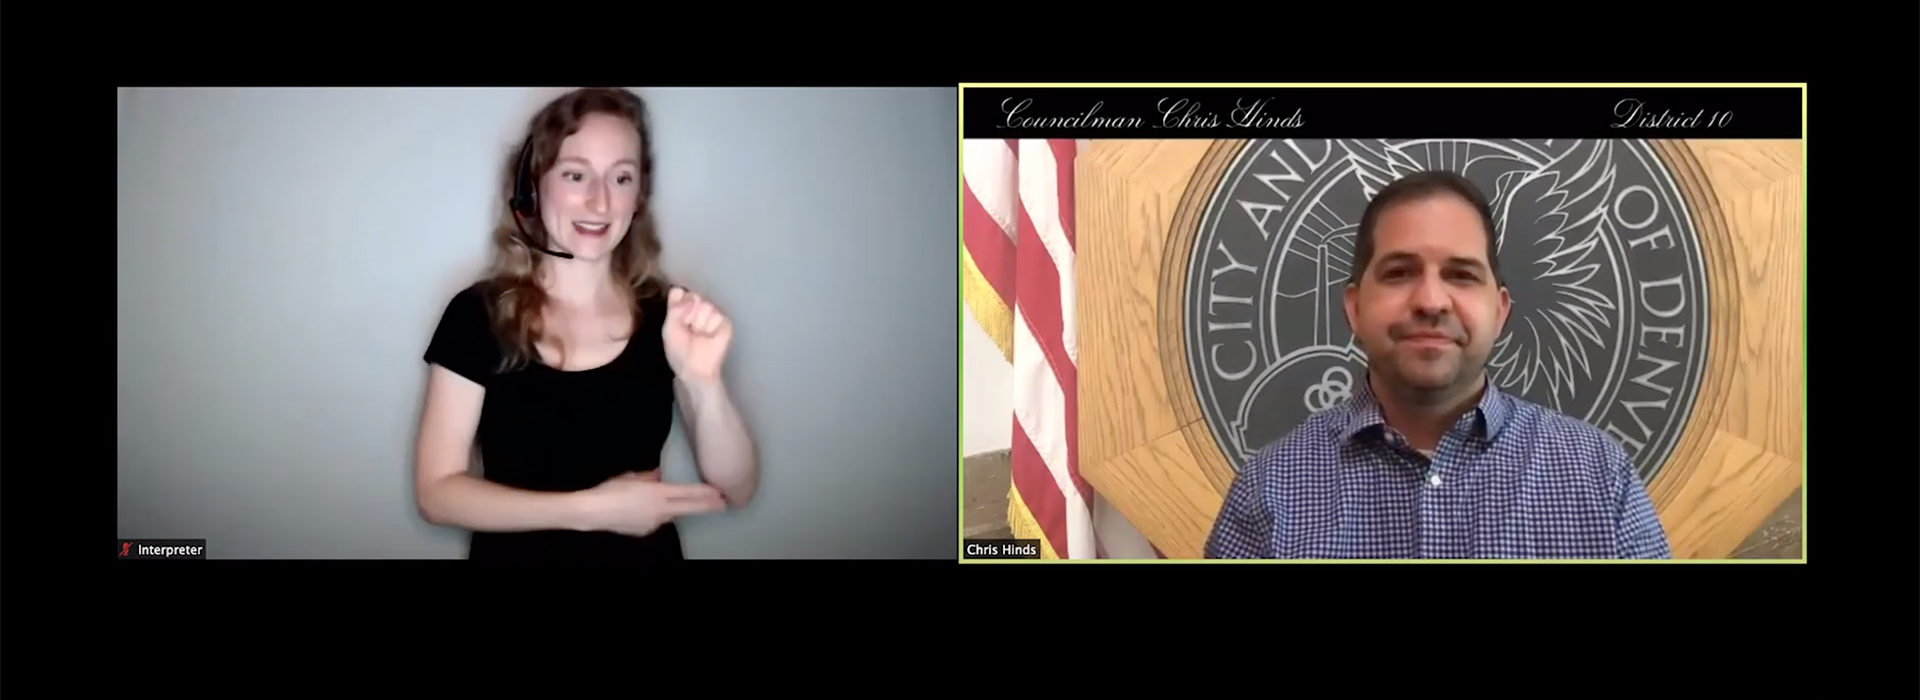 Screen shot of a woman doing ASL interpretation and a man speaking with the City of Denver seal behind him